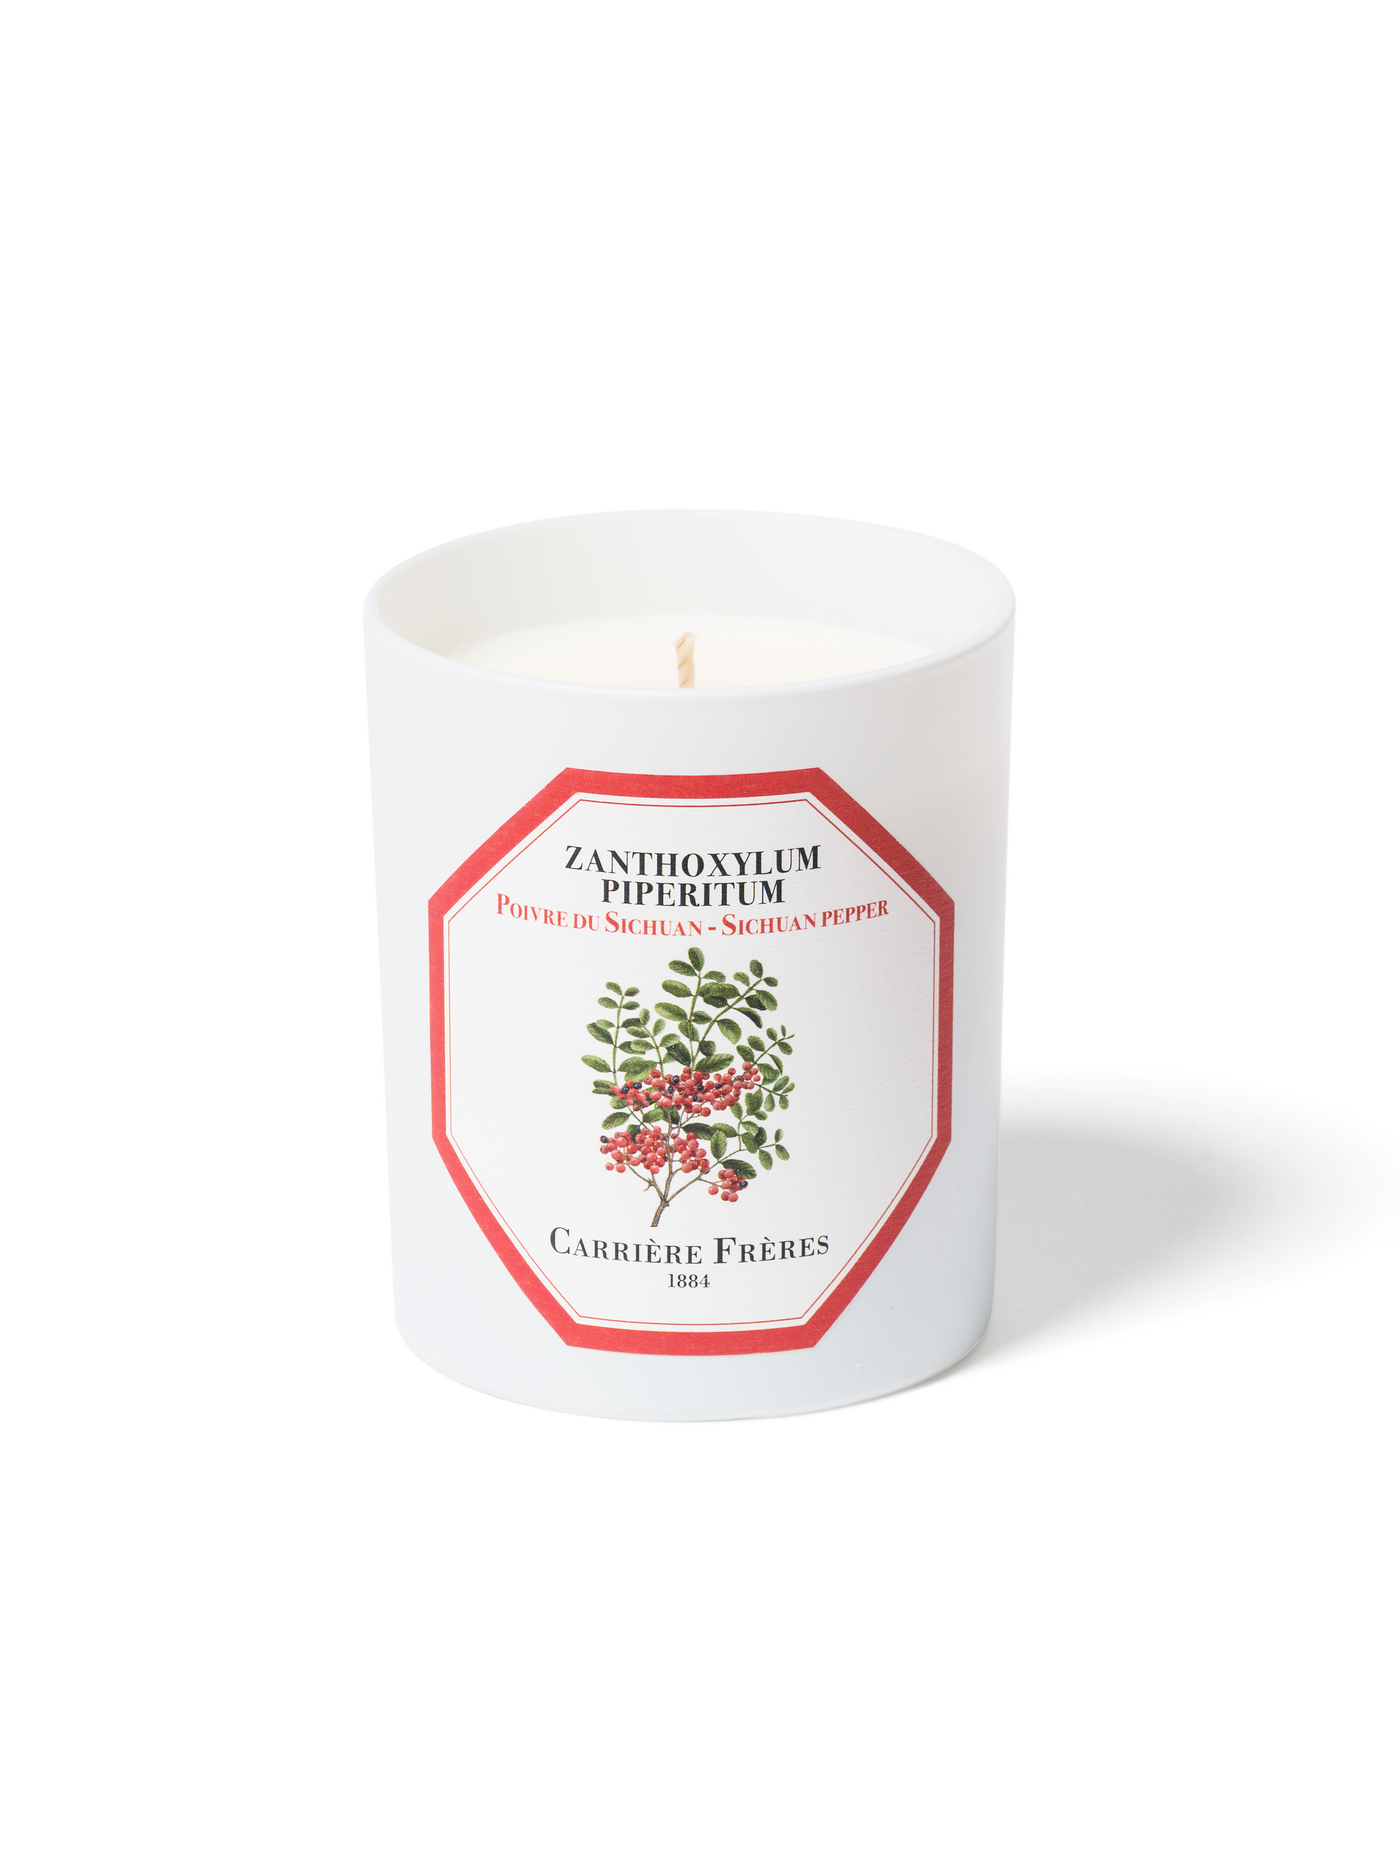 Carriere Freres Scented Sichuan Pepper Candle